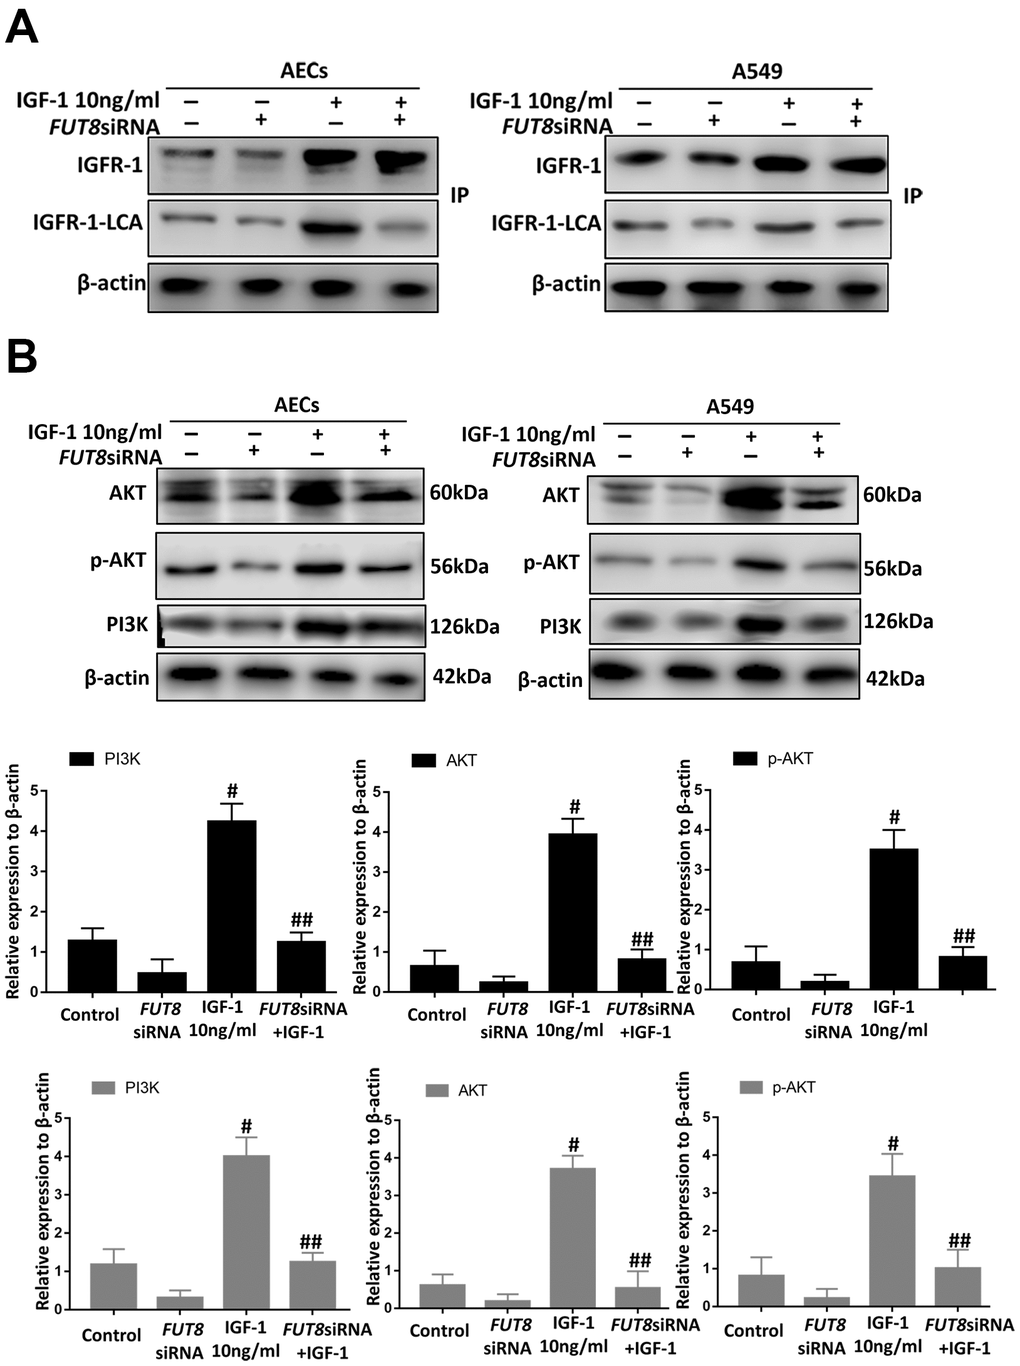 CF regulates AEC senescence through the IGF1/PI3K/AKT pathways in vitro. (A) The IGFR-1 level in total cell lysates was assessed using western blotting analyses. Lectin blot analysis of the immunoprecipitated IGFR-1 protein. IGFR-1 was immunoprecipitated from whole cell lysates using anti-IGFR-1 antibodies. The blots were probed with LCA. Representative data are shown. Quantification is shown in the lower panel. (B) PI3K, AKT and p-AKT levels were assessed using western blotting analyses. Total cell lysates were subjected to immunoblotting. #P ##P # indicates the comparison of the control group with the IGF1 group; ## indicates the comparison of the FUT8siRNA+ IGF1 group with the IGF1 group. One-way ANOVA followed by Dunnett’s Multiple Comparison Test. Each experiment was performed in triplicate.